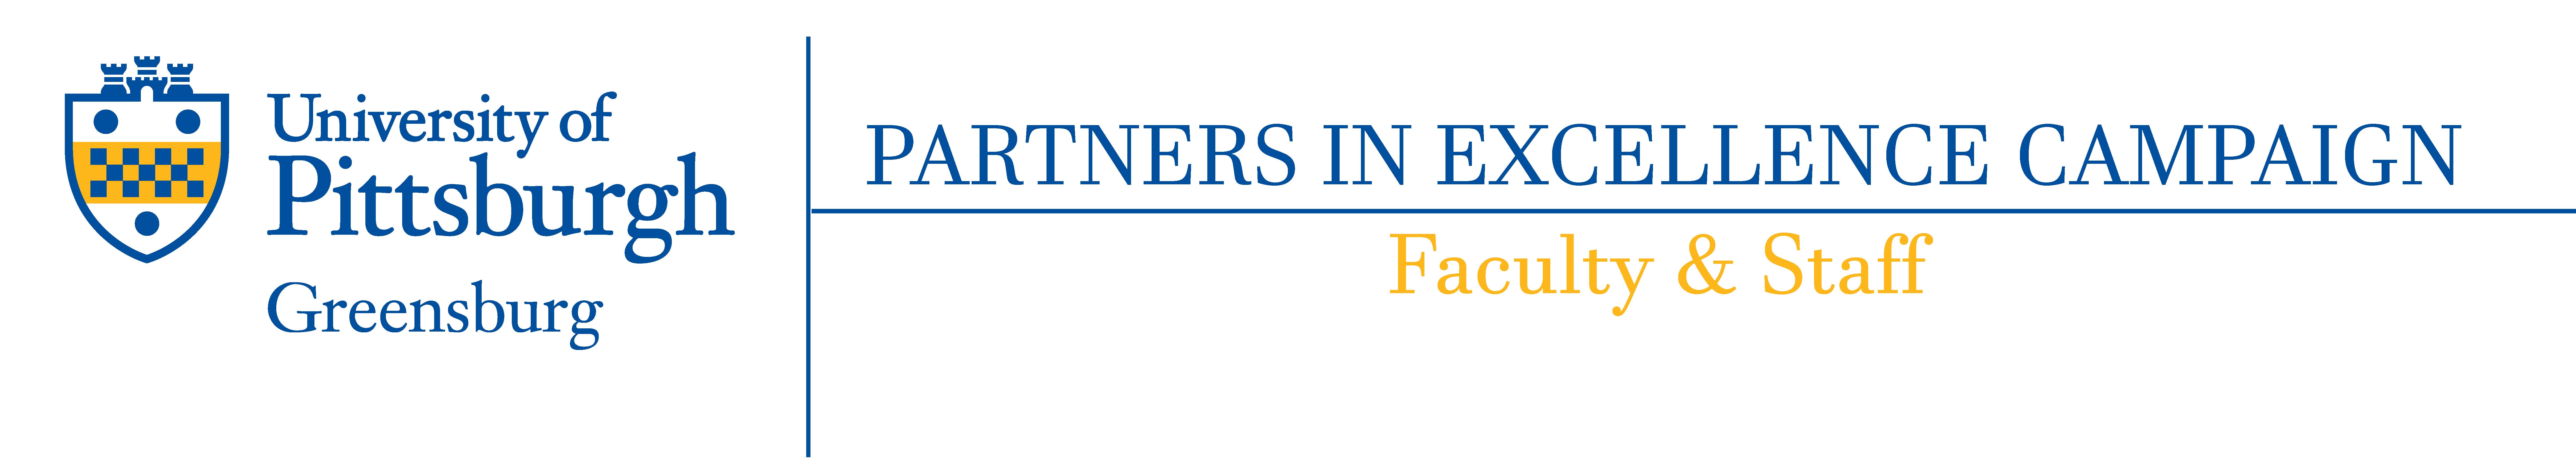 Partners in Excellence campaign logo